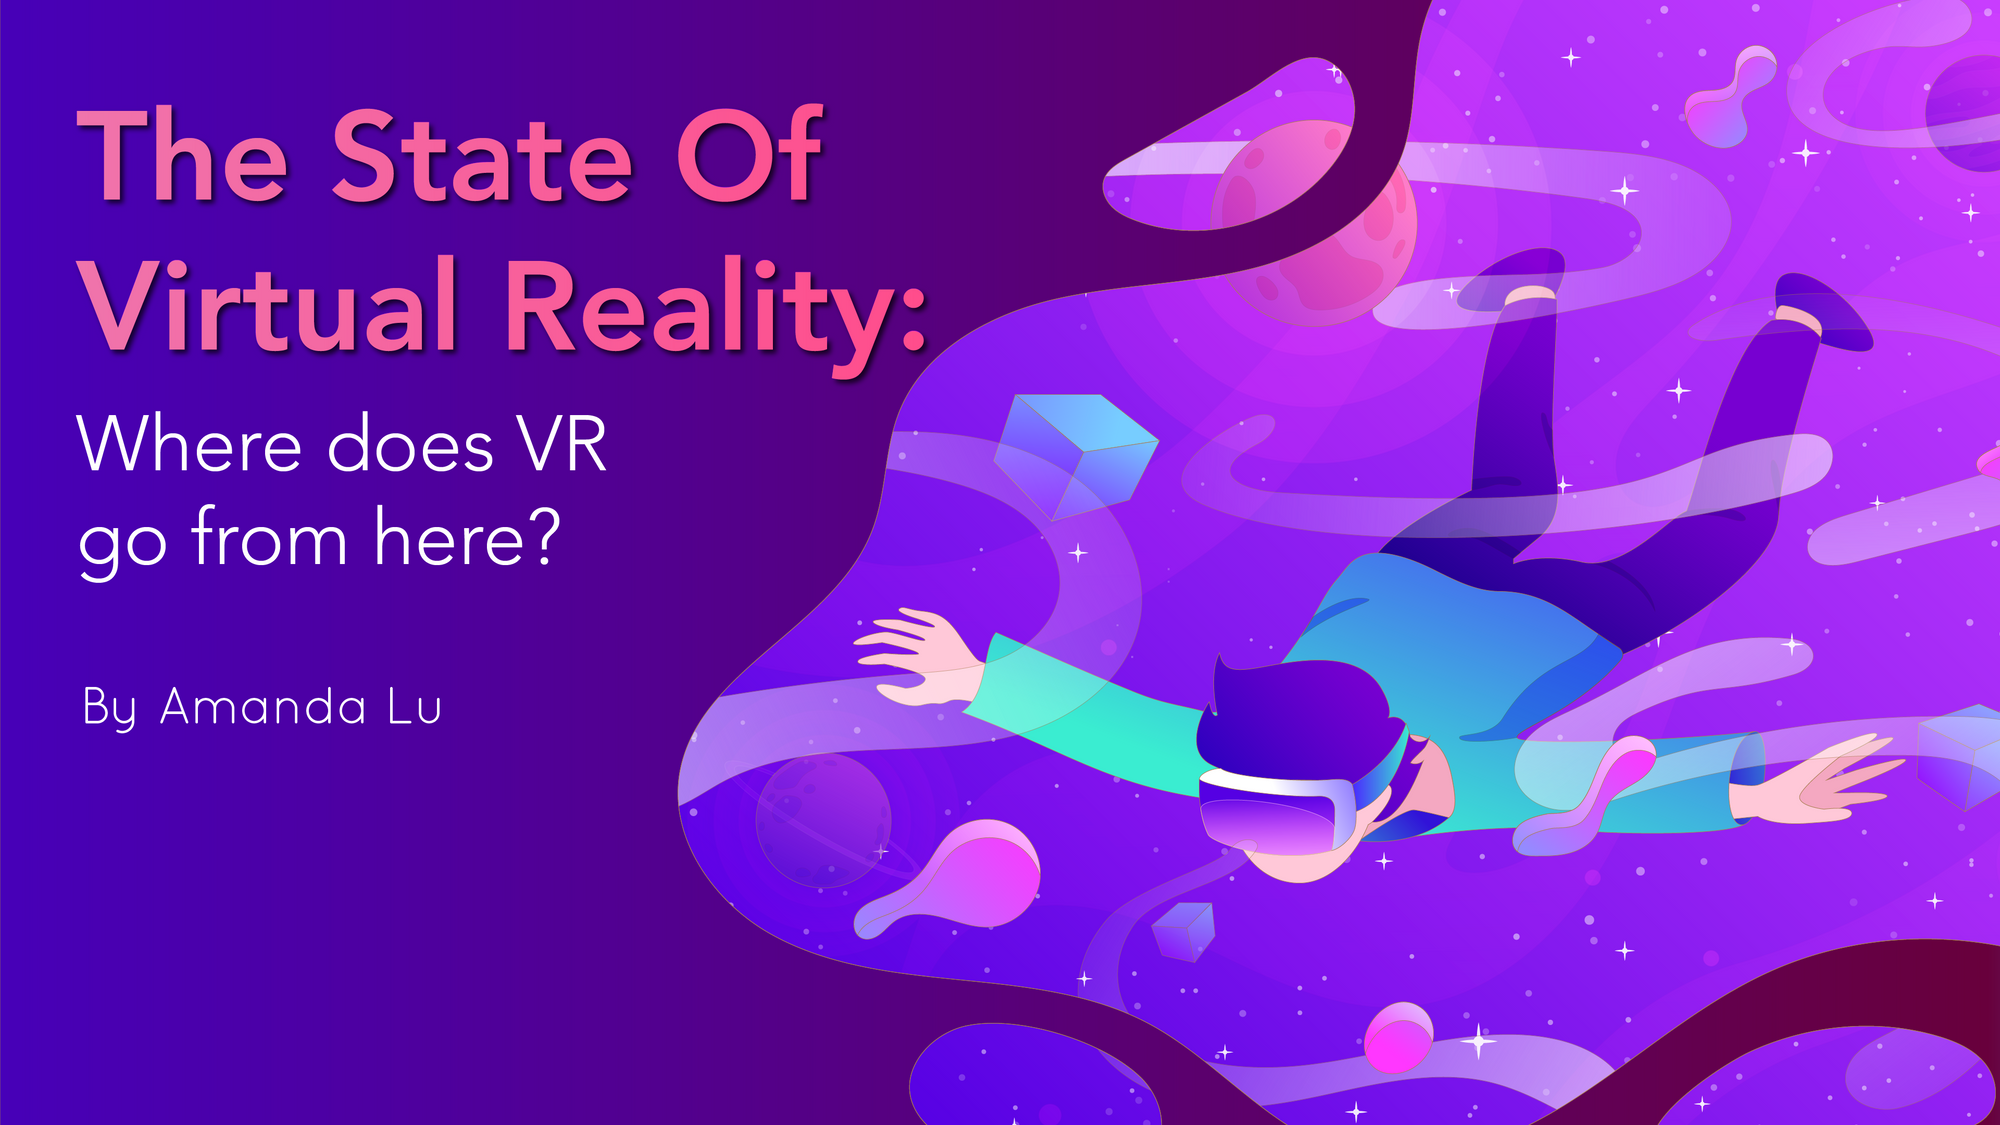 The State of Virtual Reality: Where does VR go from here?